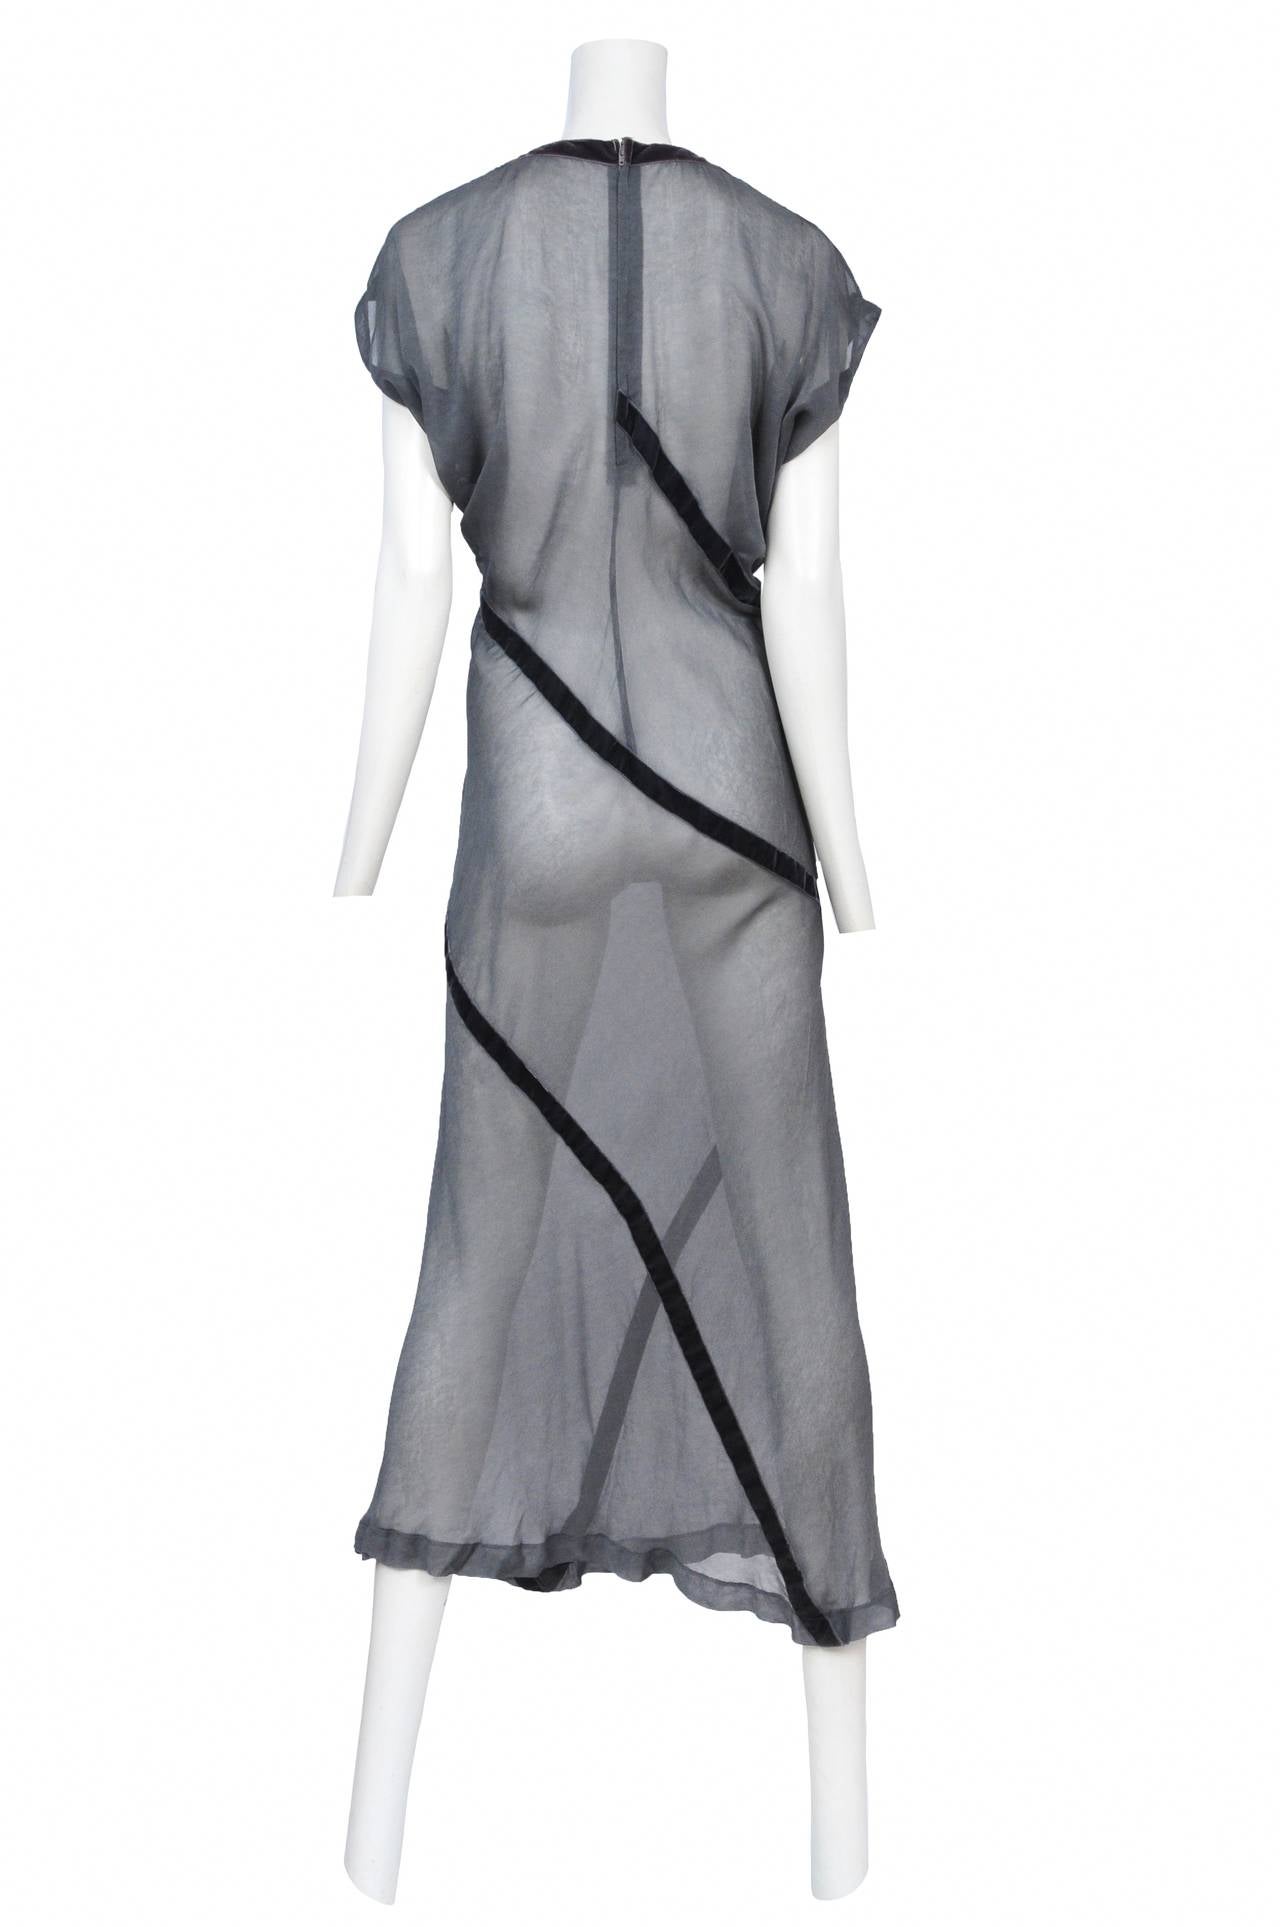 Vintage Comme des Garcons bias cut sheer grey lilac v-neck maxi dress featuring velvet trim throughout the bodice and along the neckline.